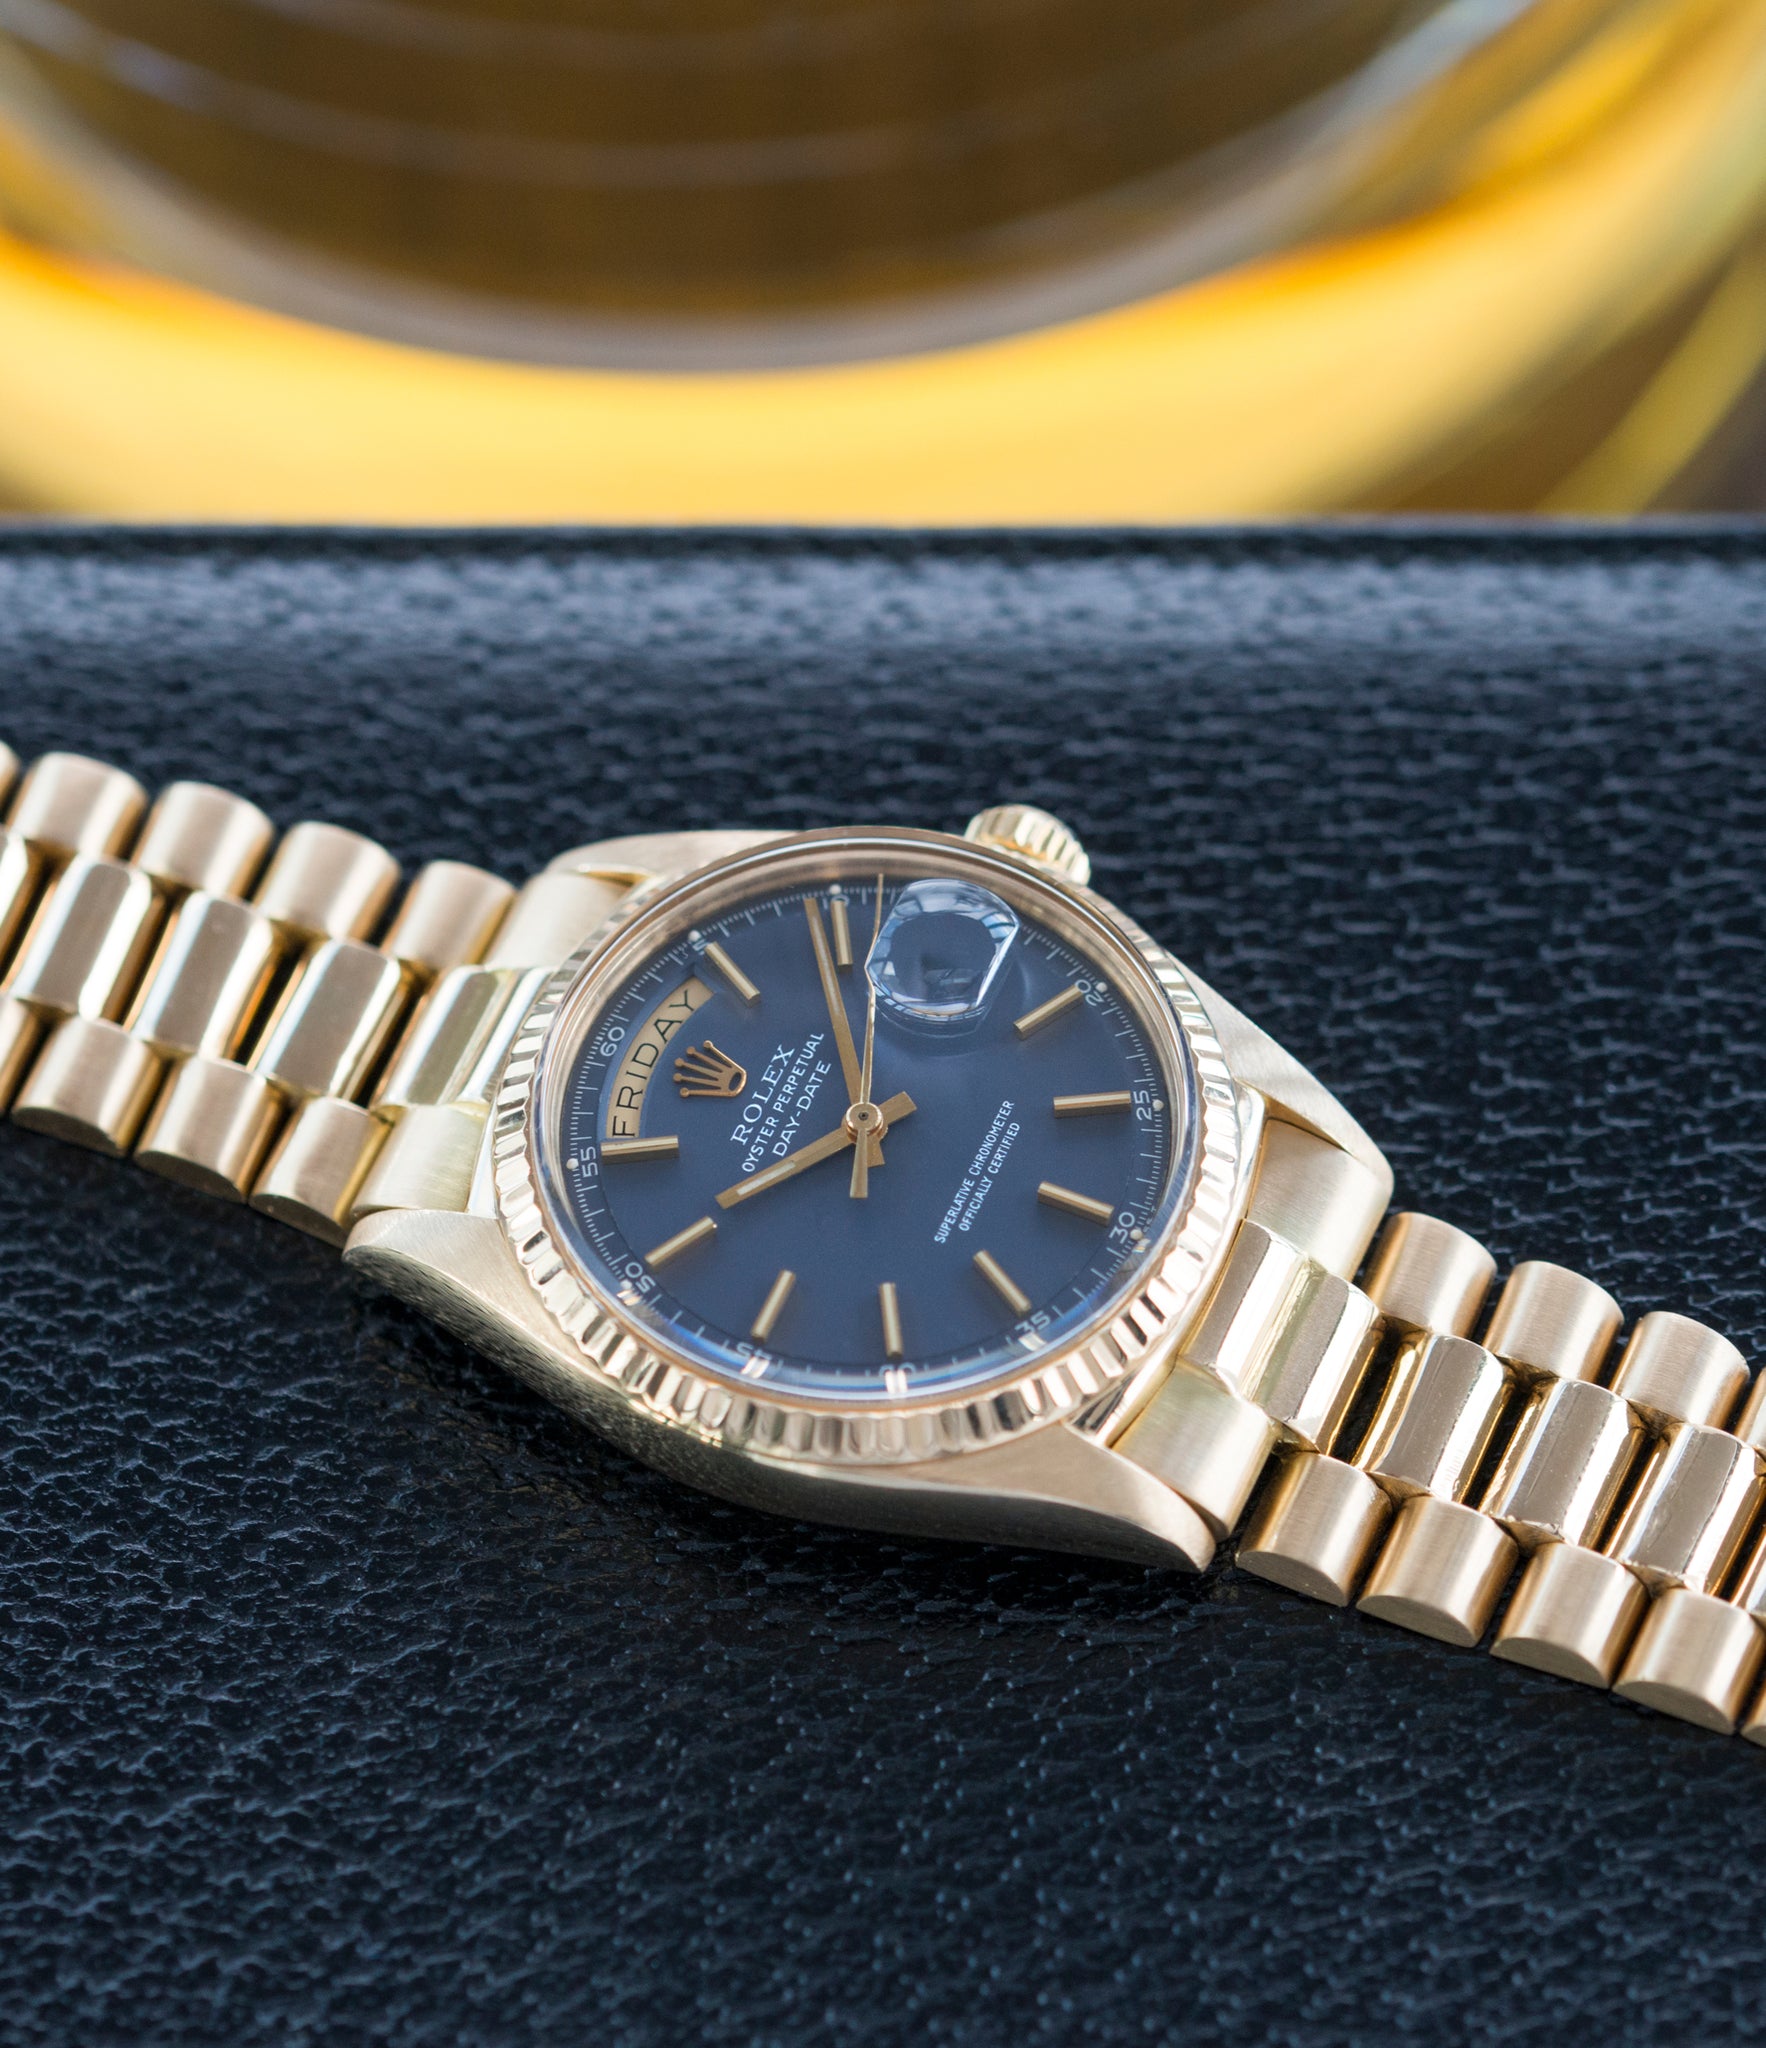 selling vintage Rolex Day-Date 1803 Oyster Perpetual Cal. 1556 gold watch blue dial for sale online at A Collected Man London UK specialist of rare watches